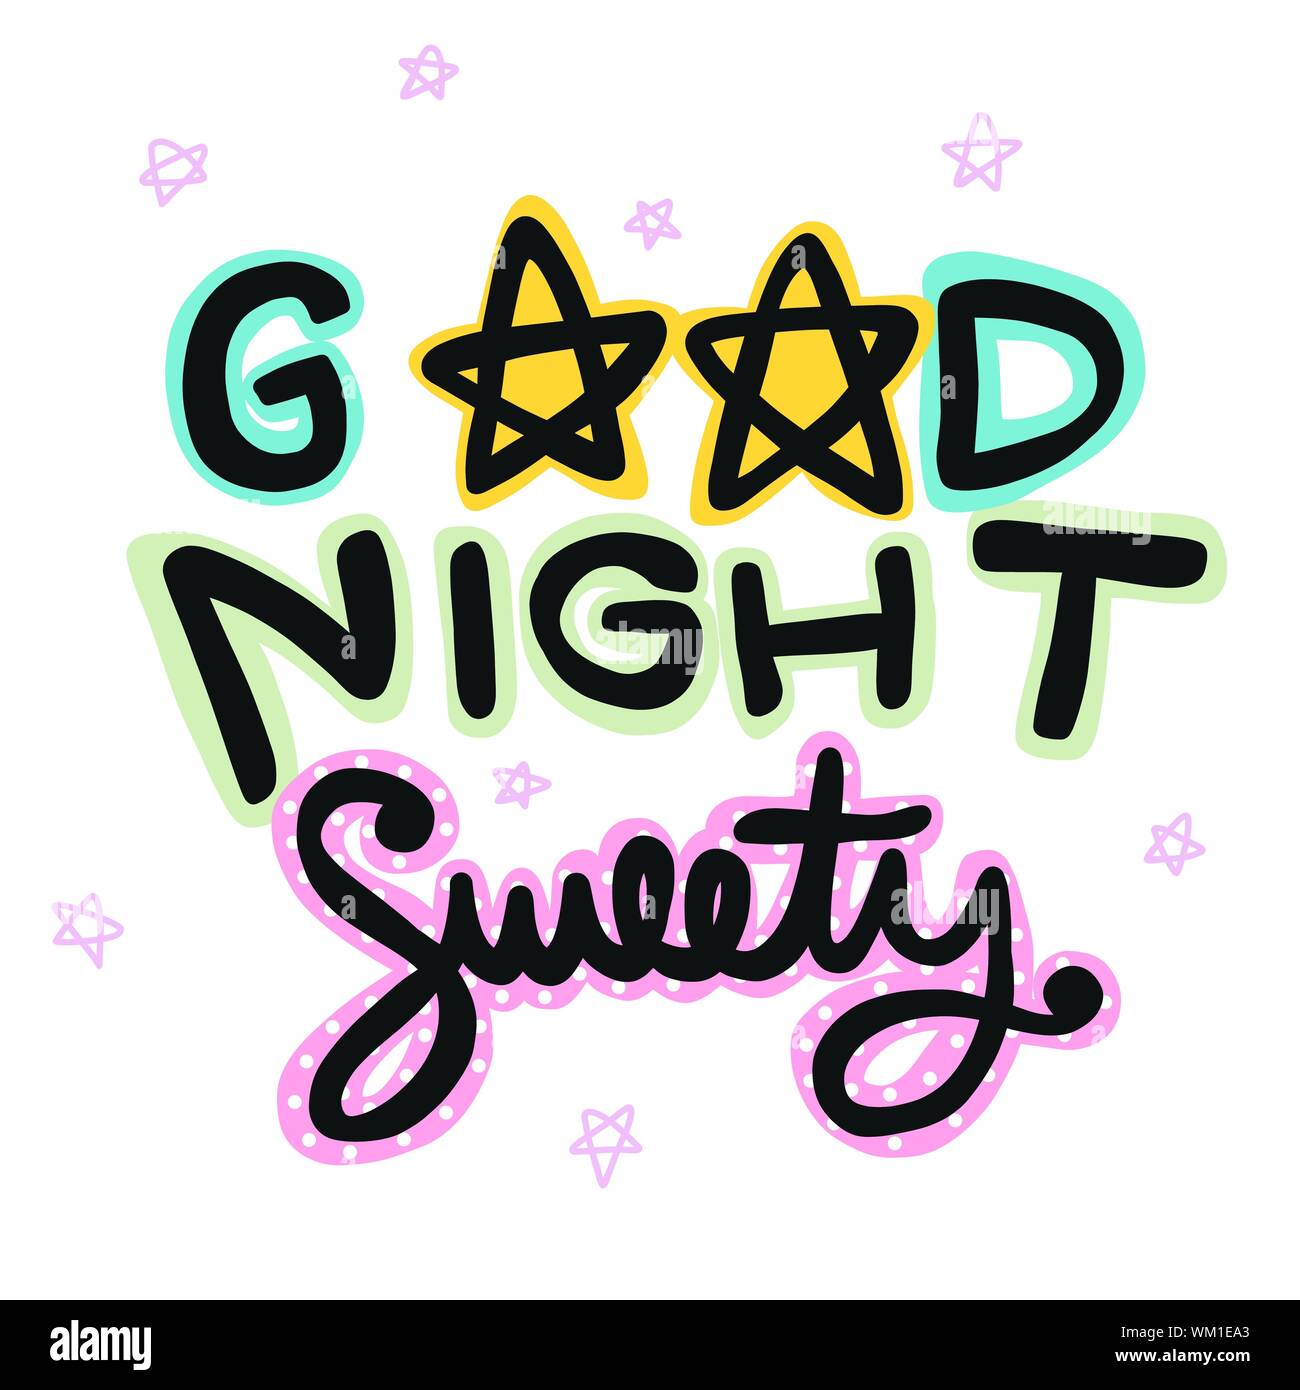 Good night sweety cute word and star vector illustration Stock Vector